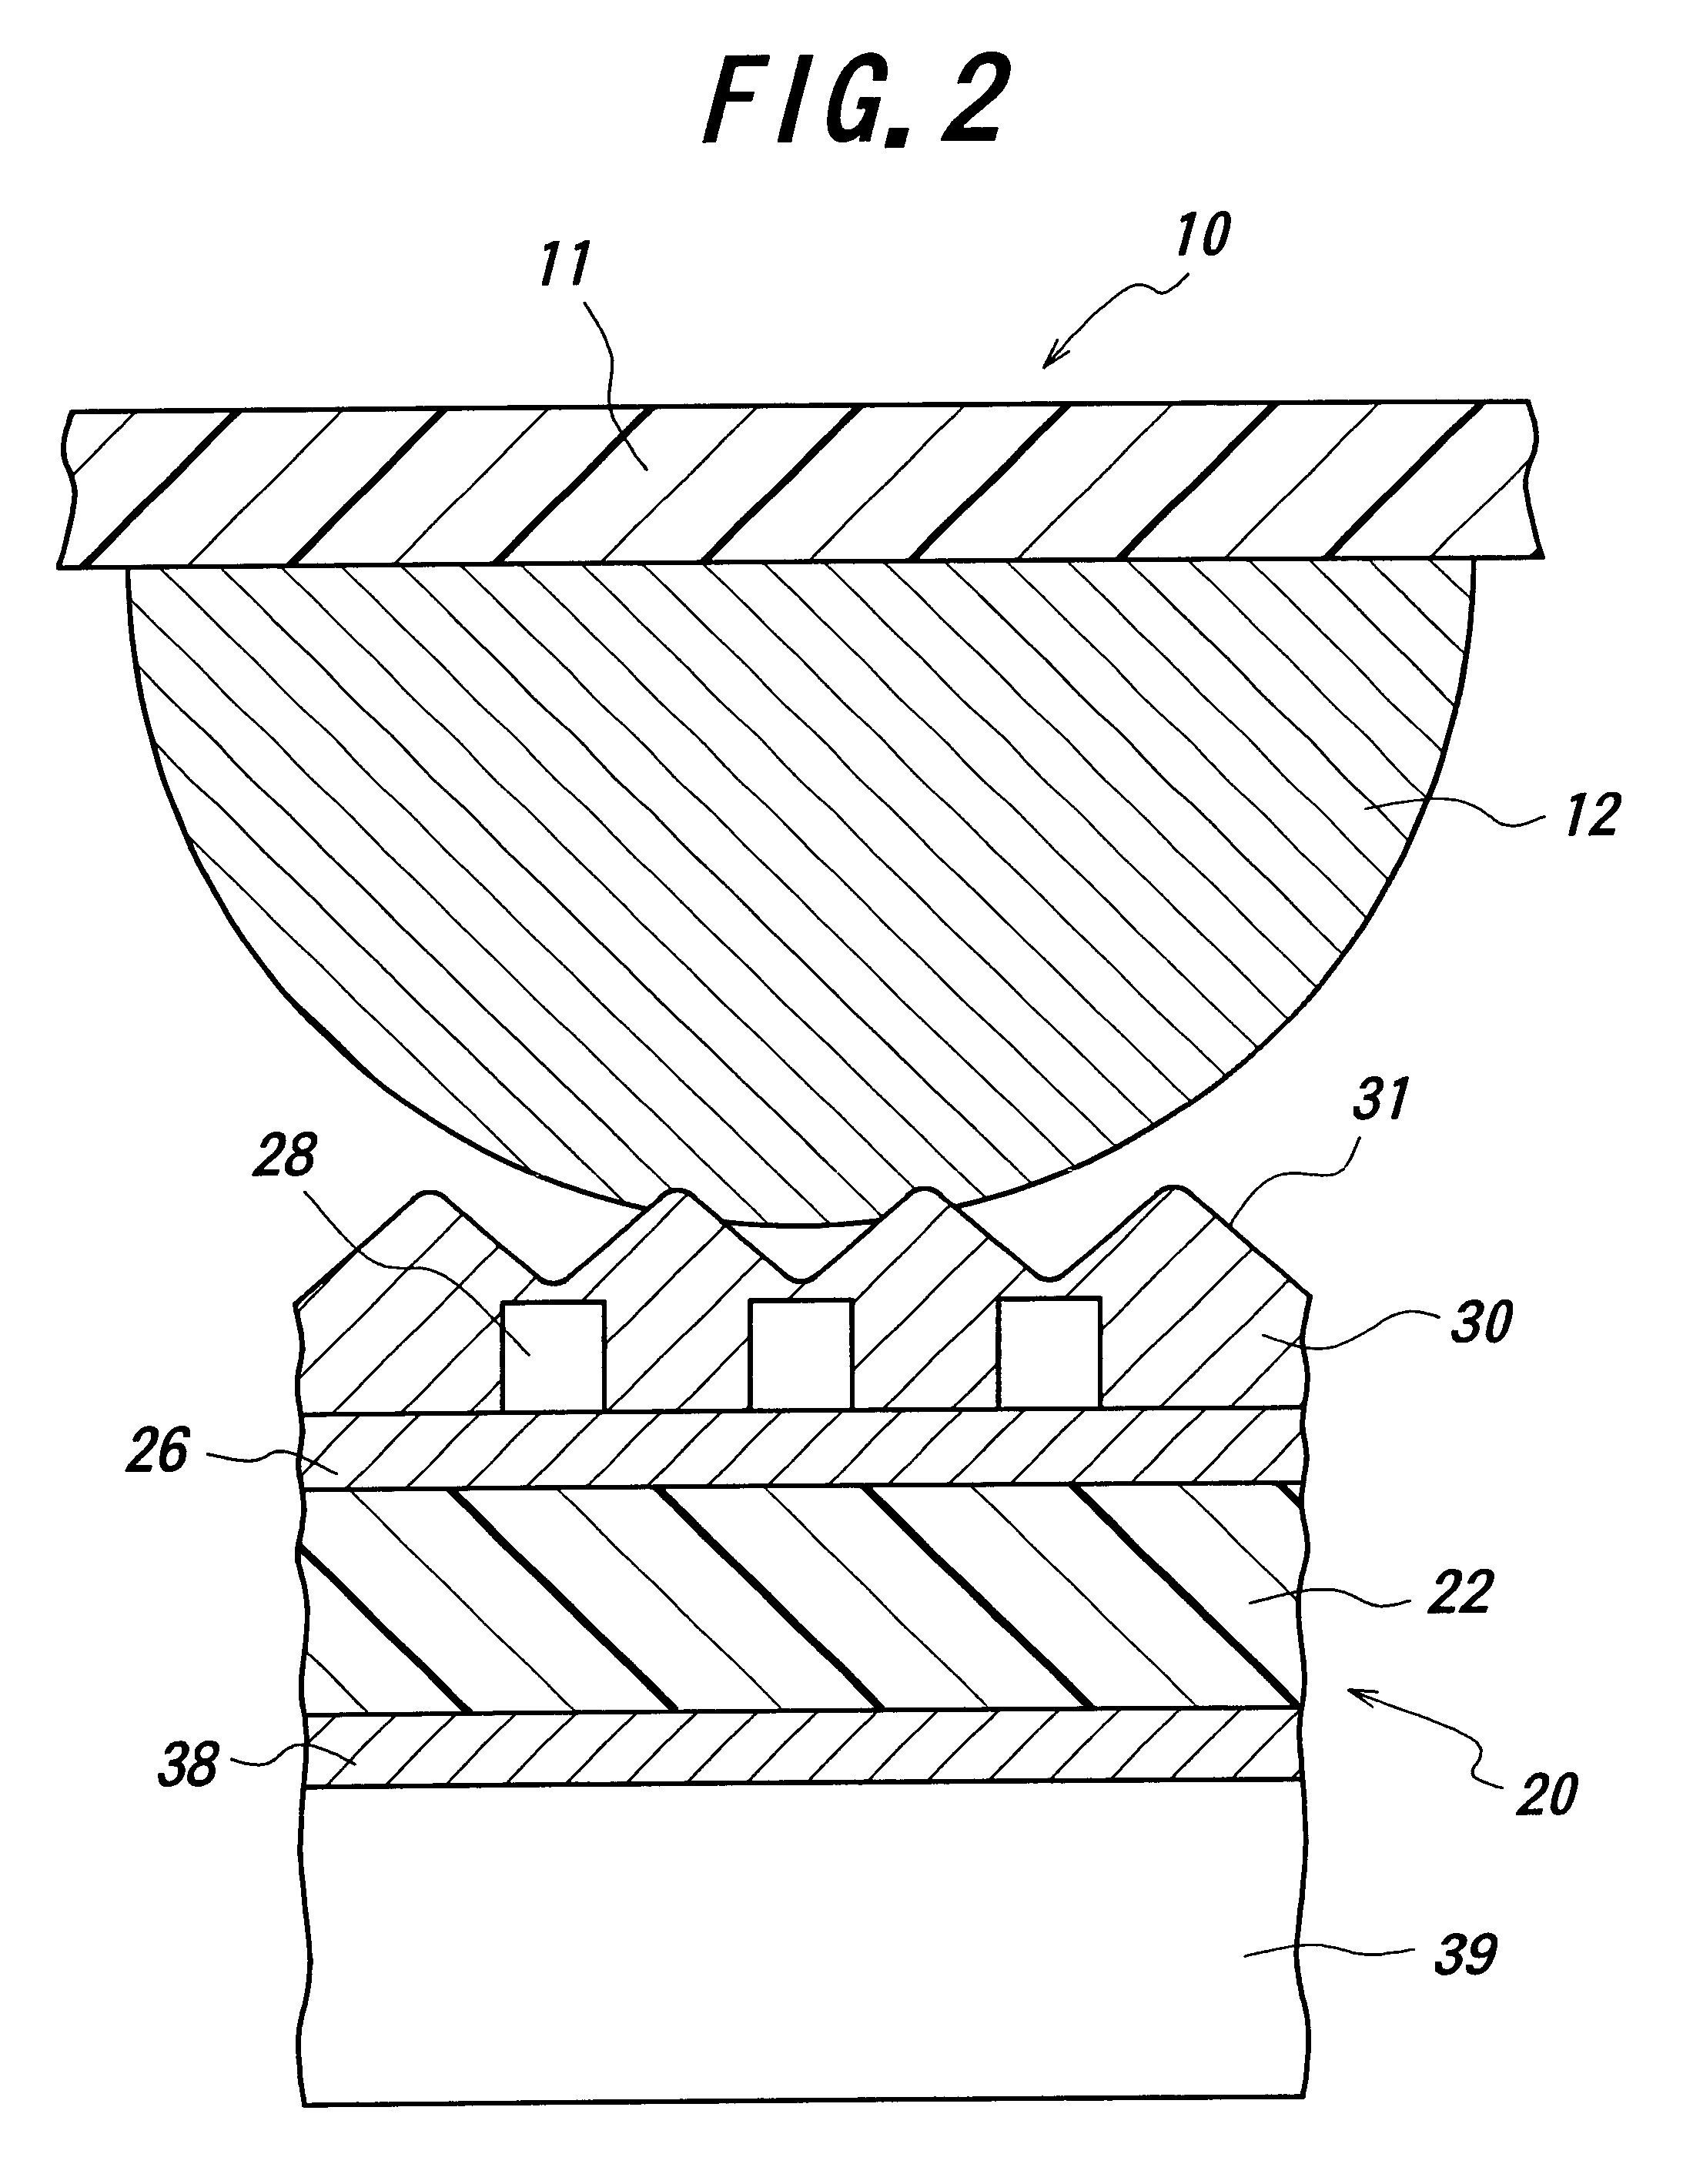 Electrical connectors adapted to reduce or prevent adherence of conductive material to contact portions as the connector